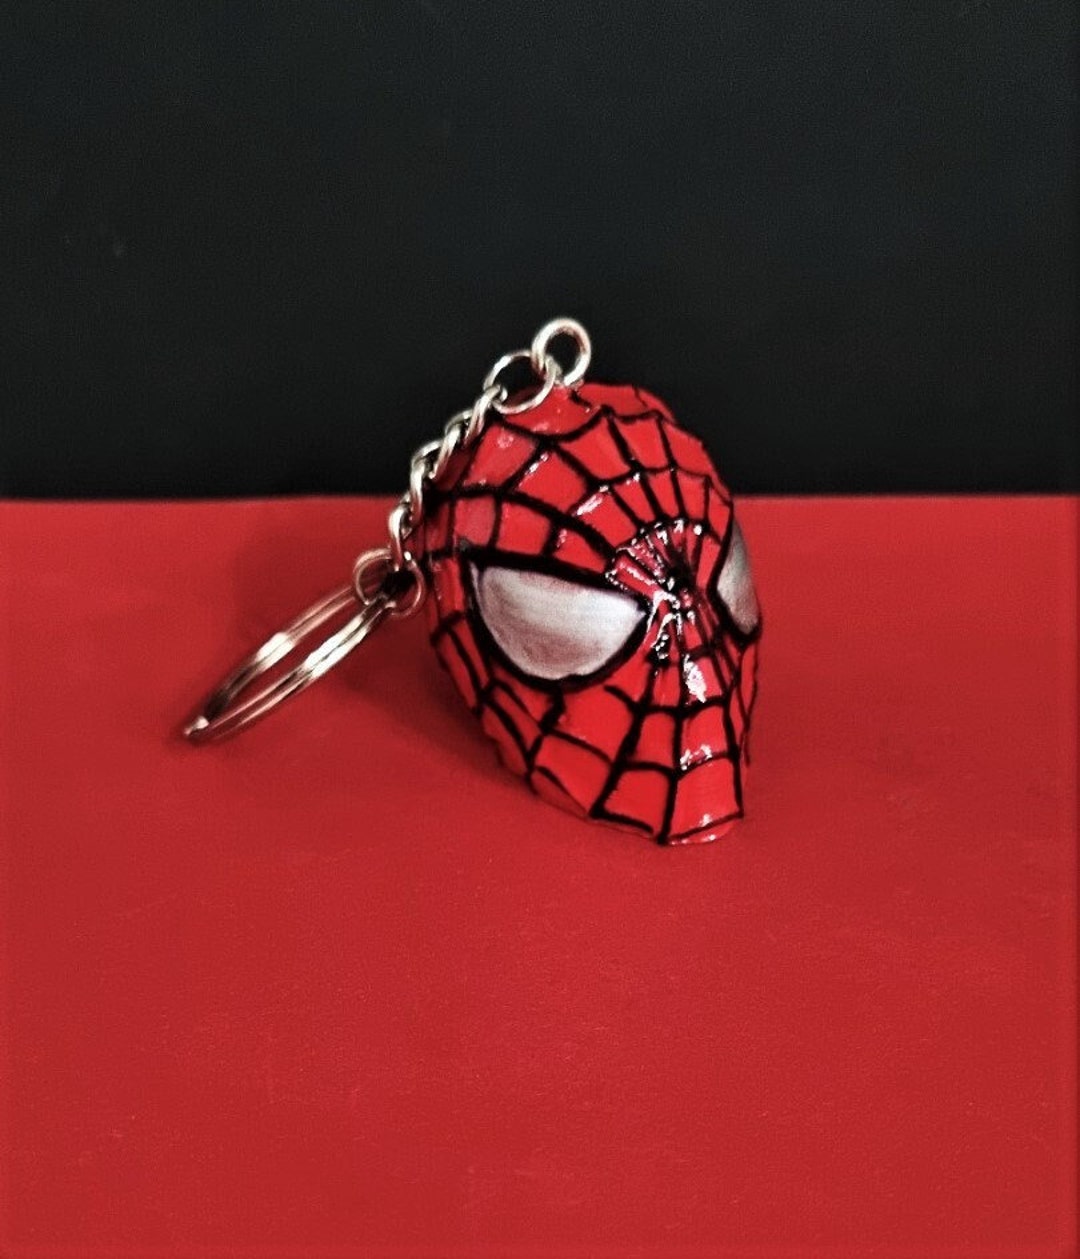 Spider-Man: Across the Spider-verse (Marvel) 3D Sculpted Surprise Character  Keychain Clip